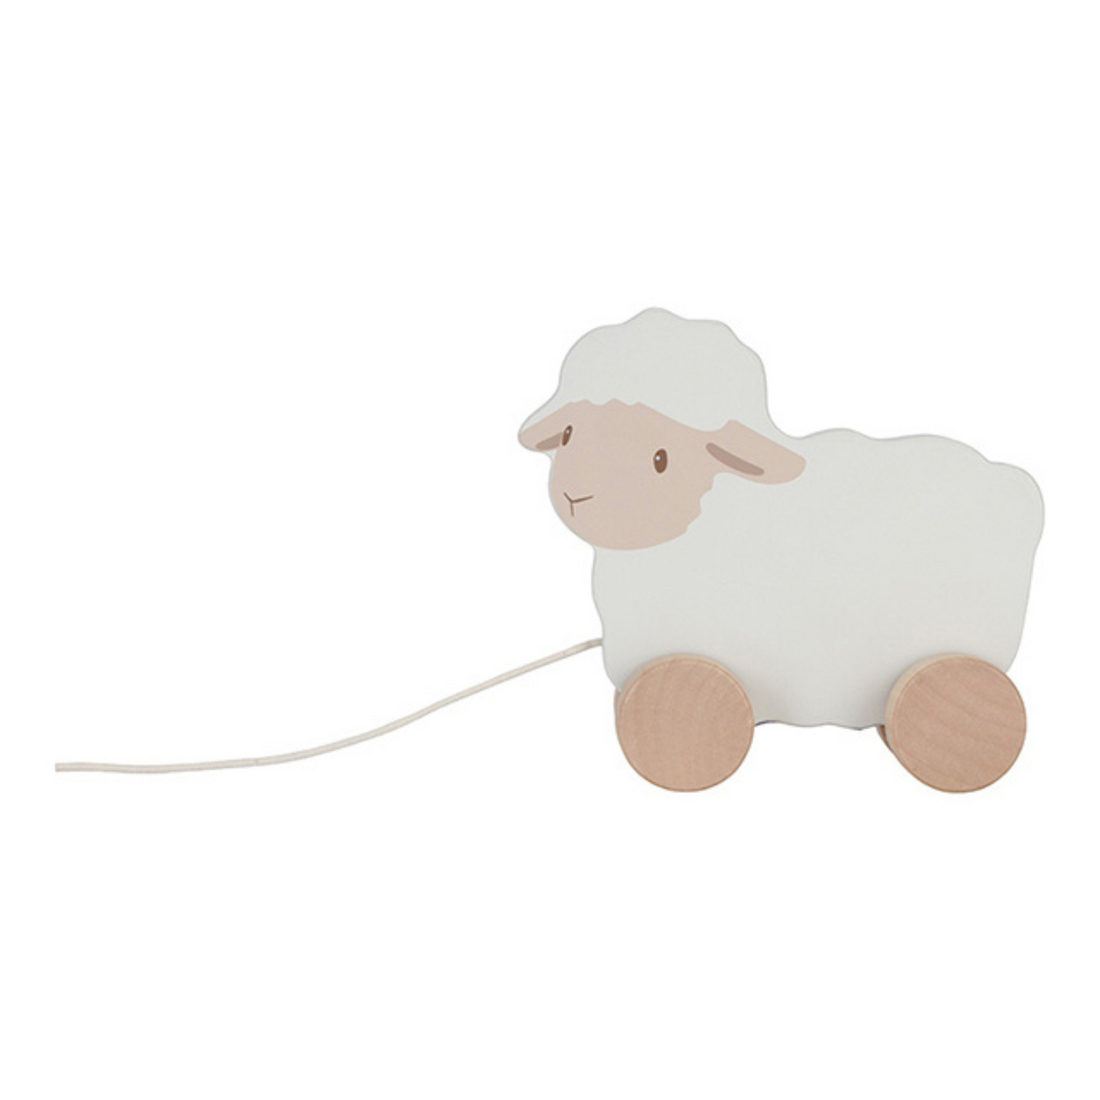 A toy sheep is pulled